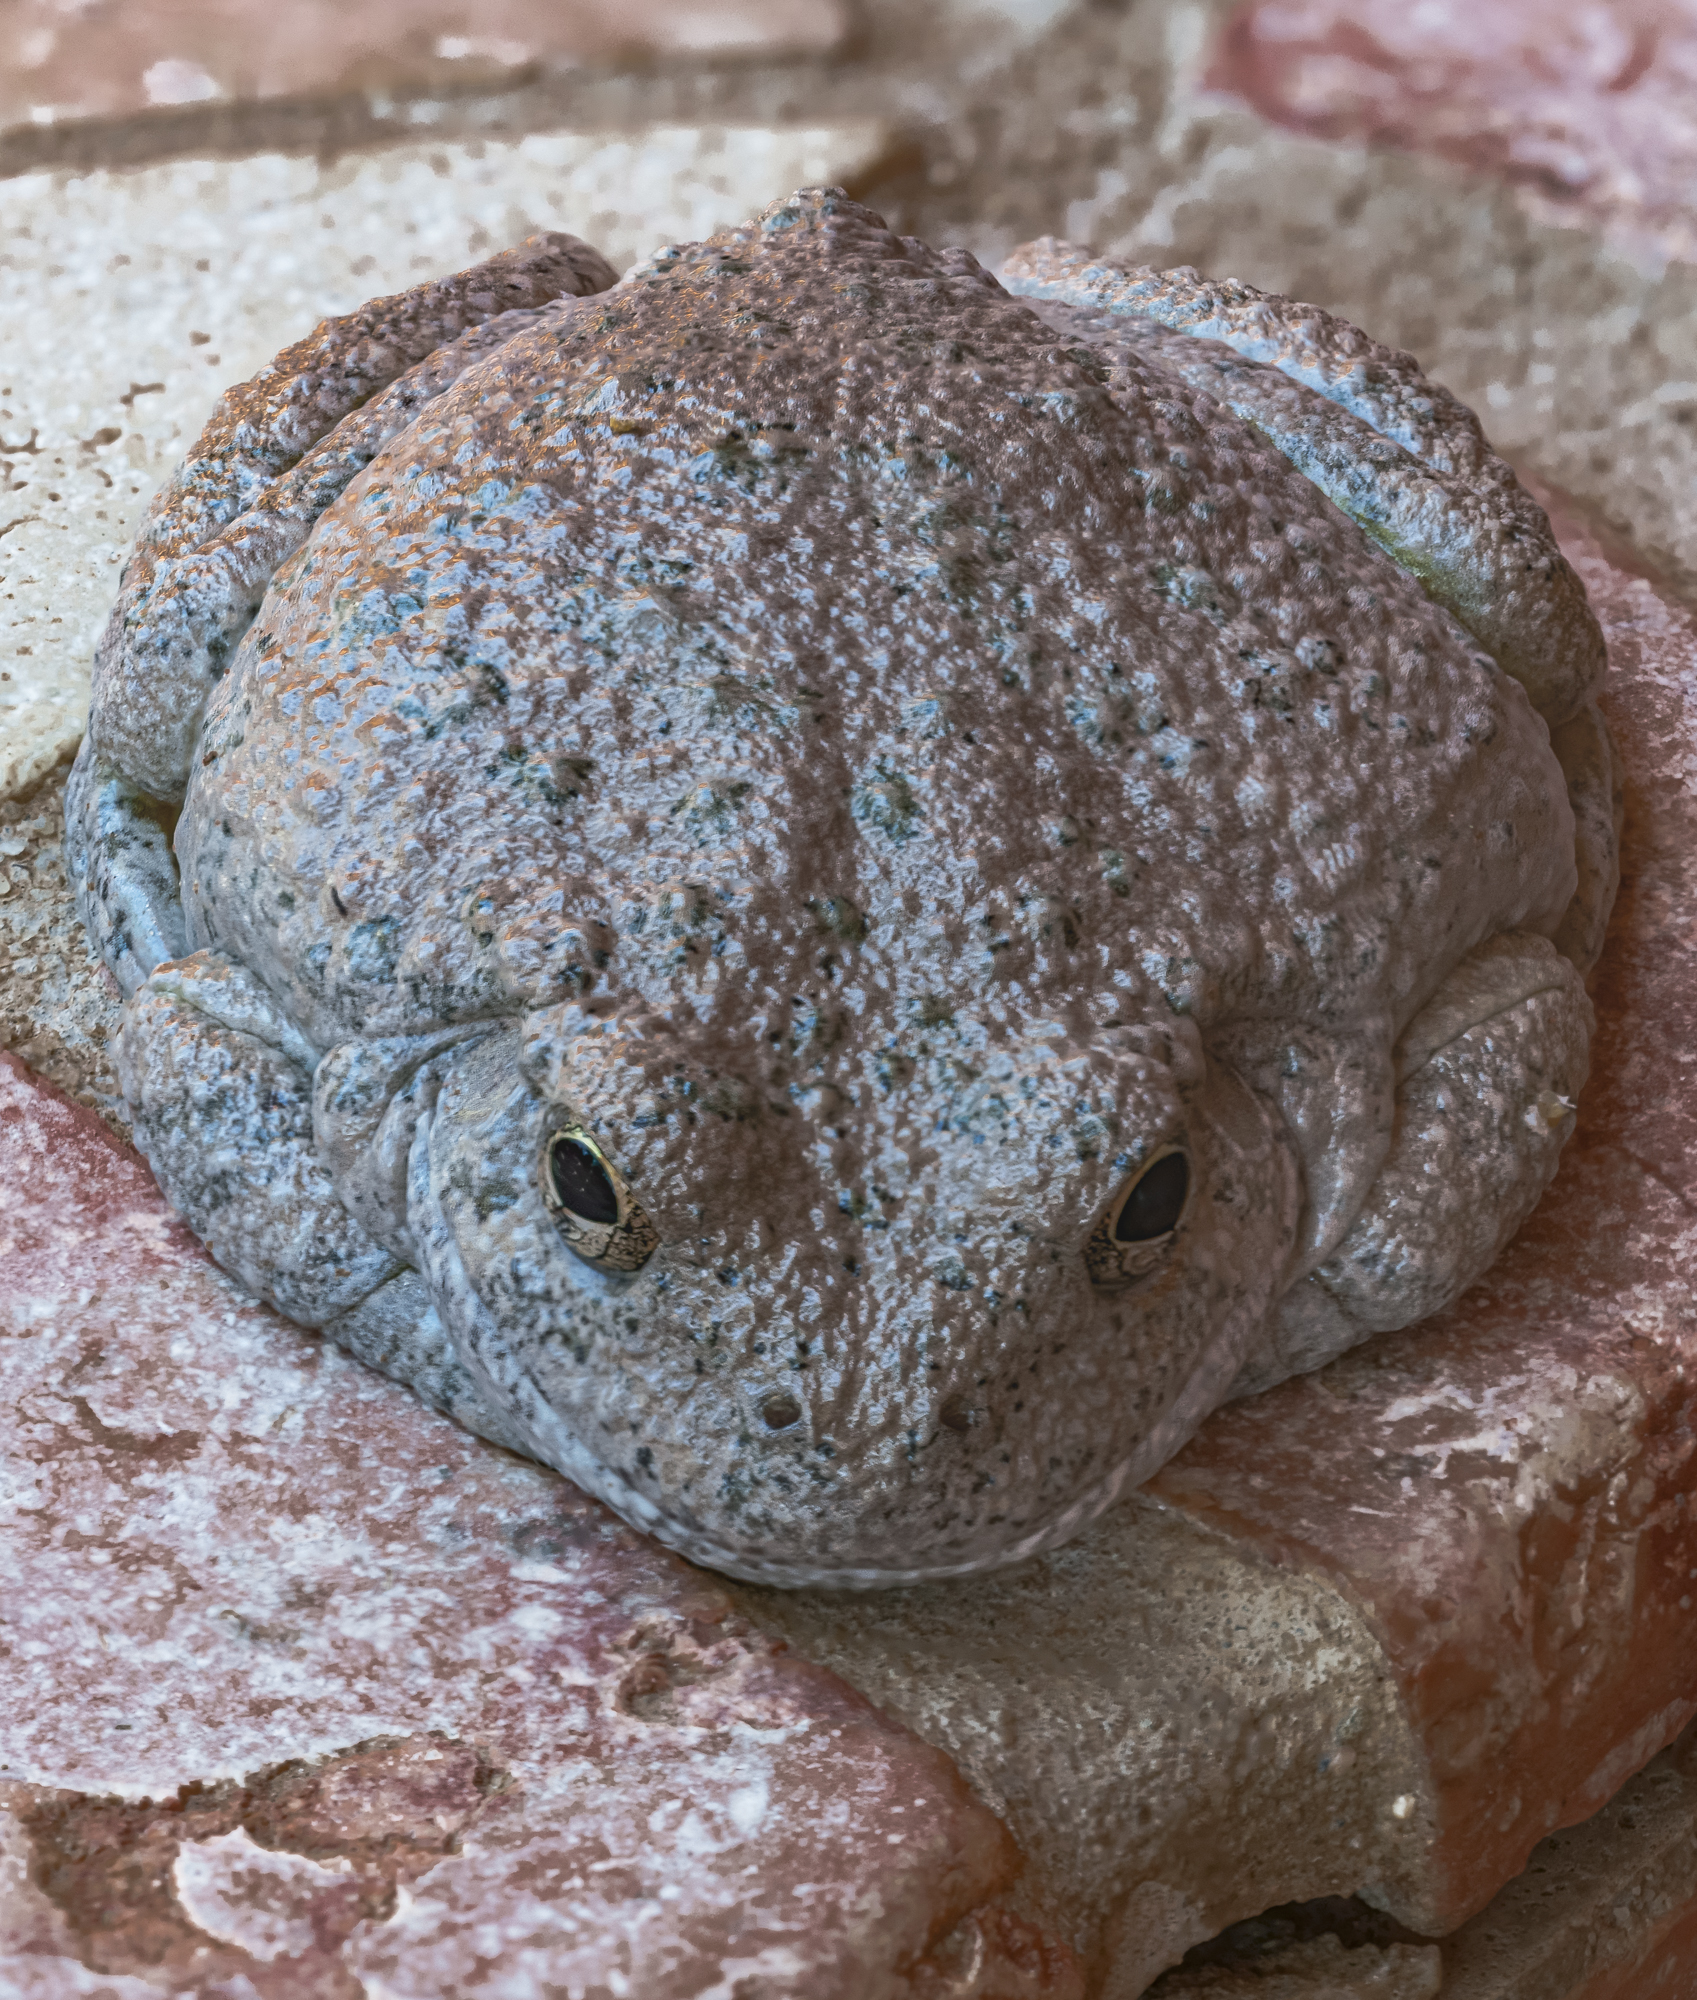 Arizona Toad poses for twenty differentially focused images